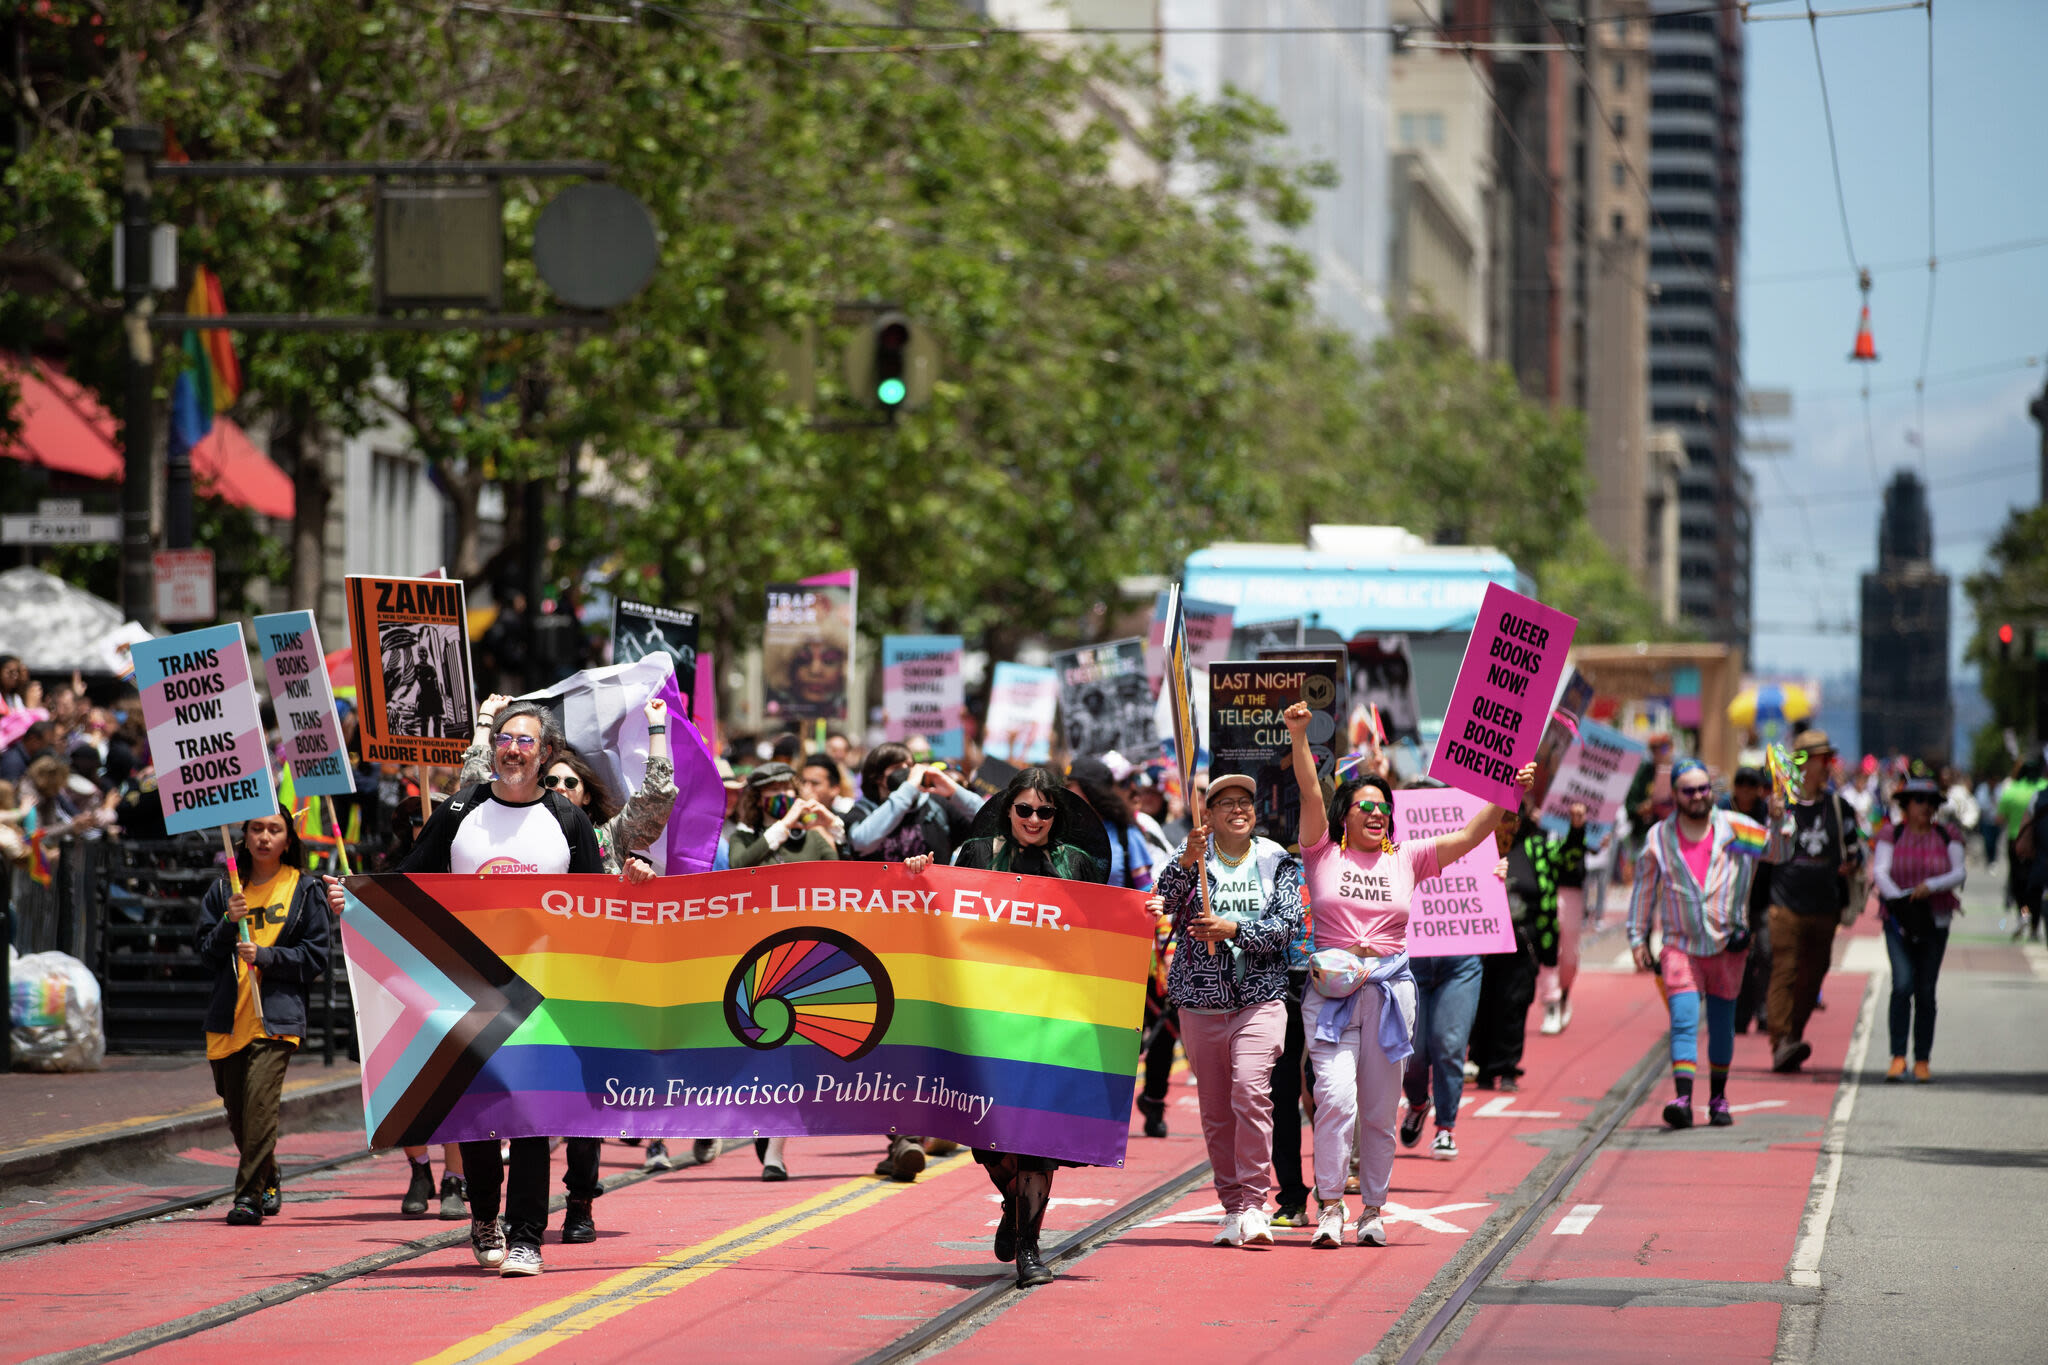 SF Pride confuses, upsets with statements about not having an Israeli float